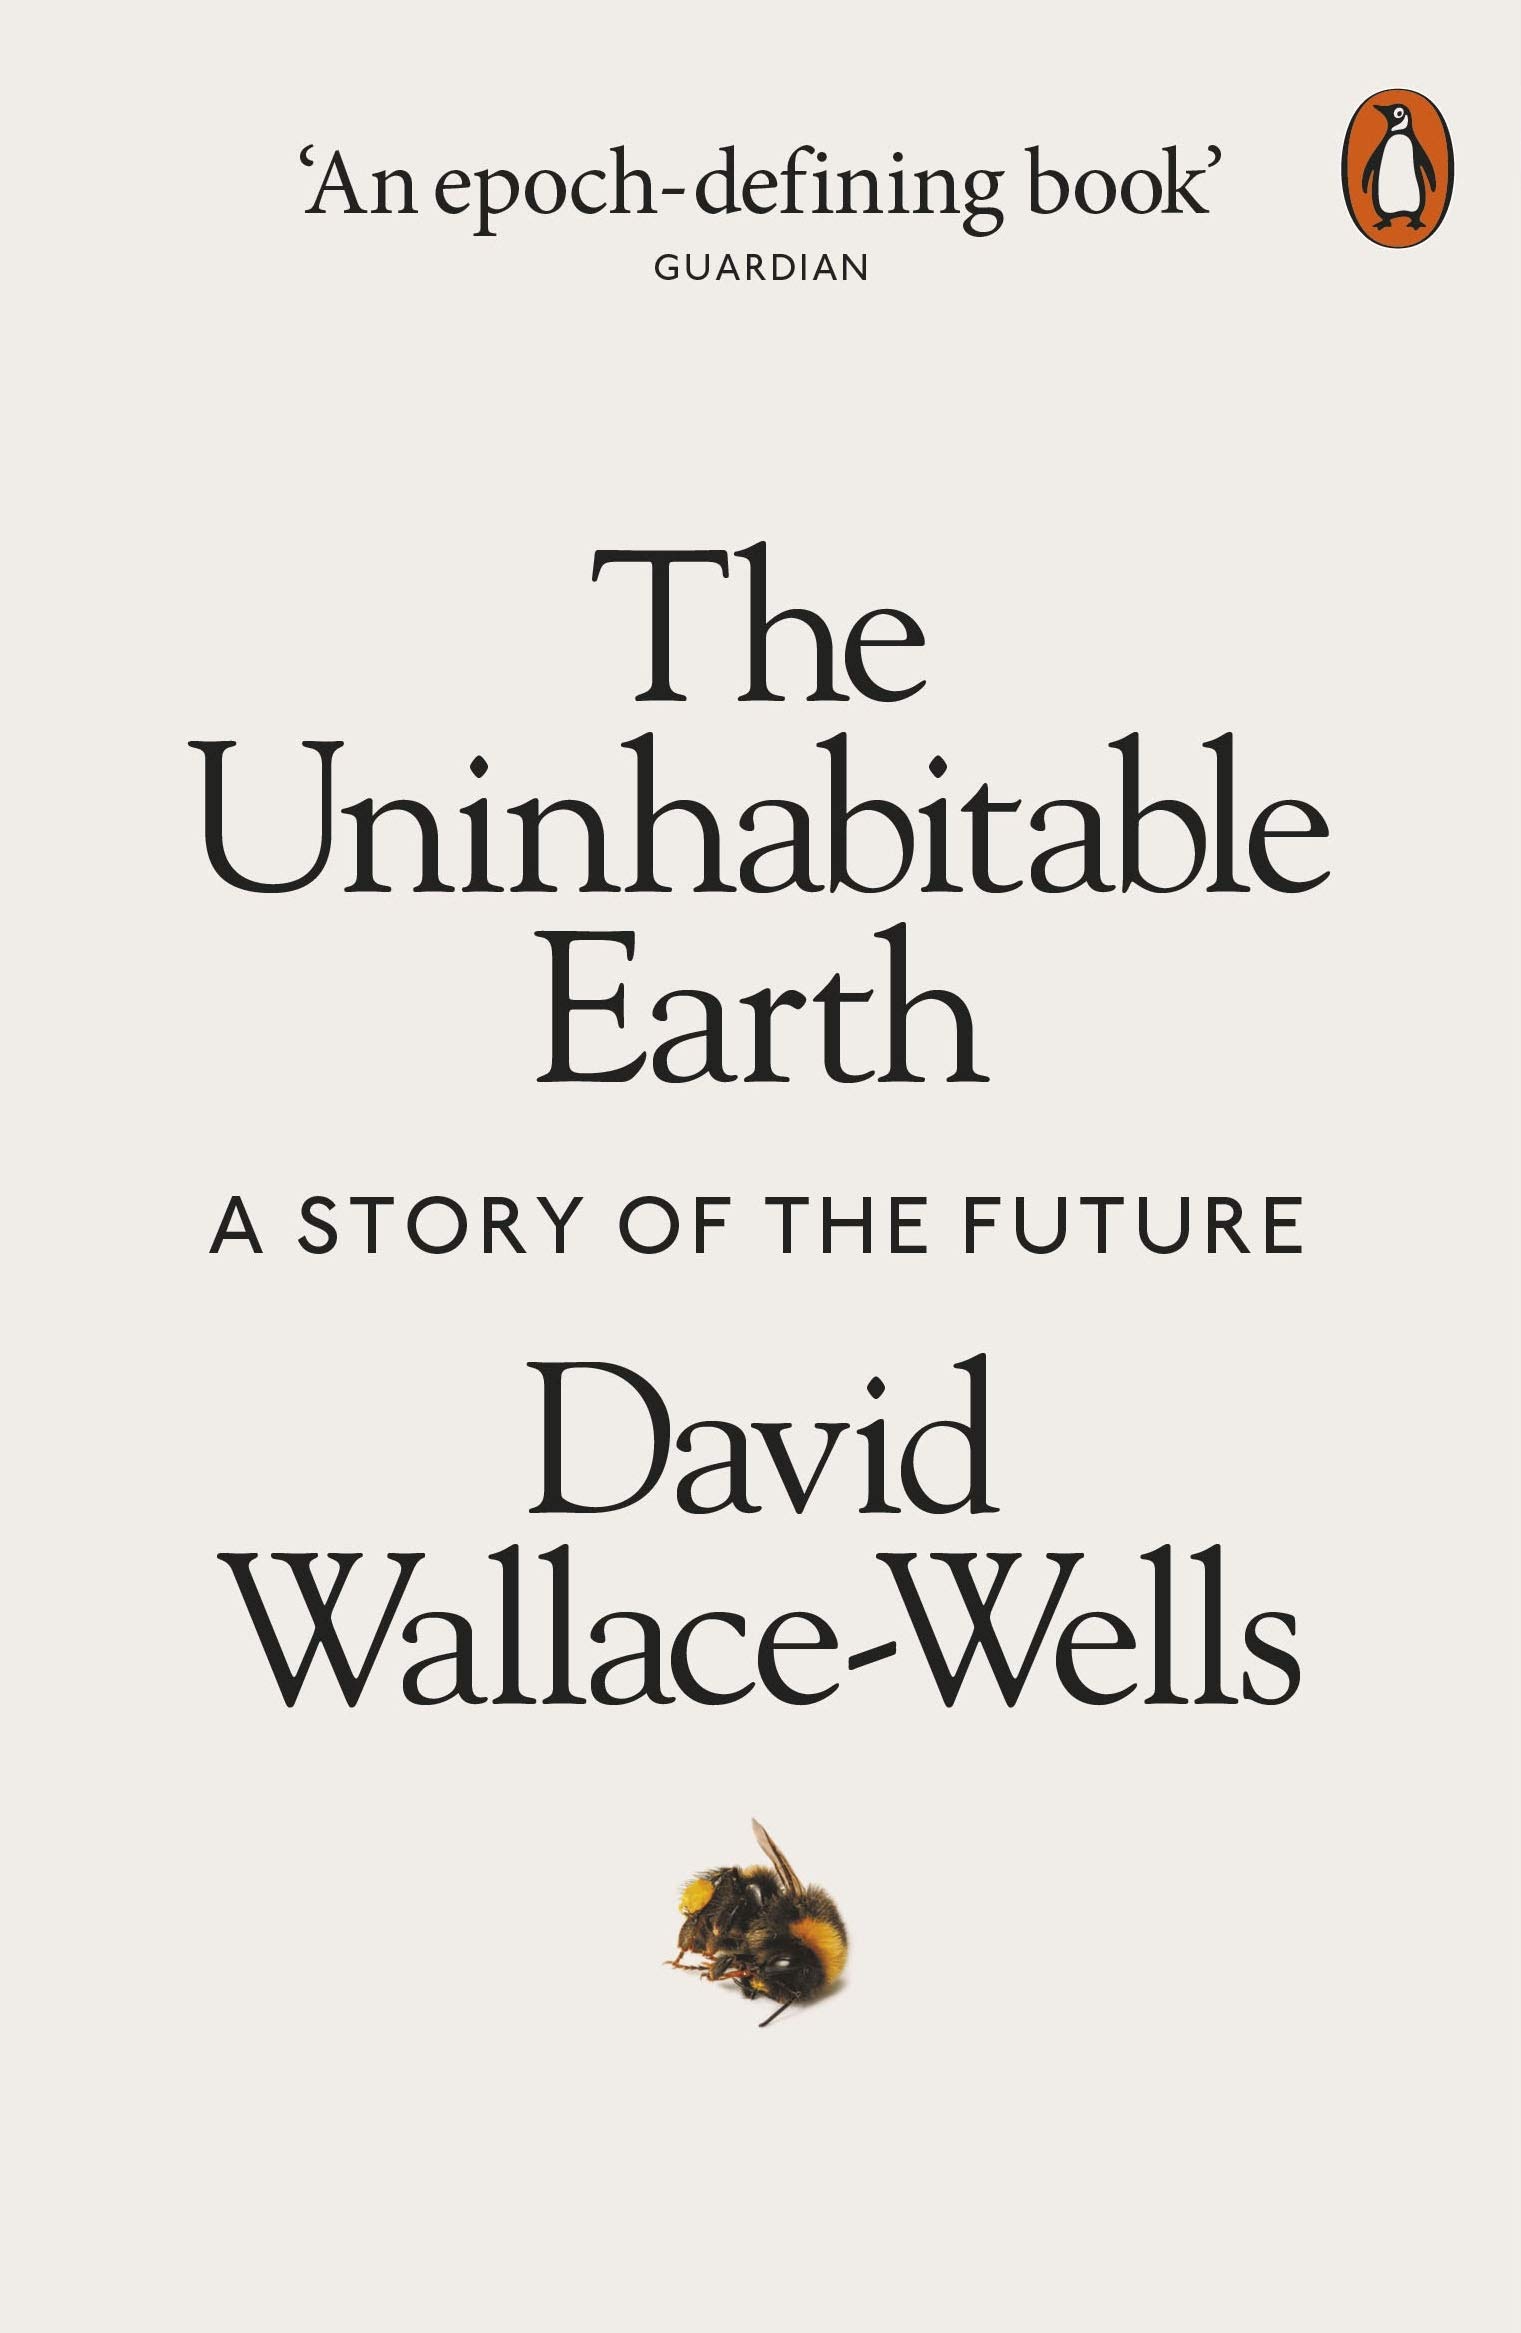 The Uninhabitable Earth: A Story of the Future - David Wallace-Wells